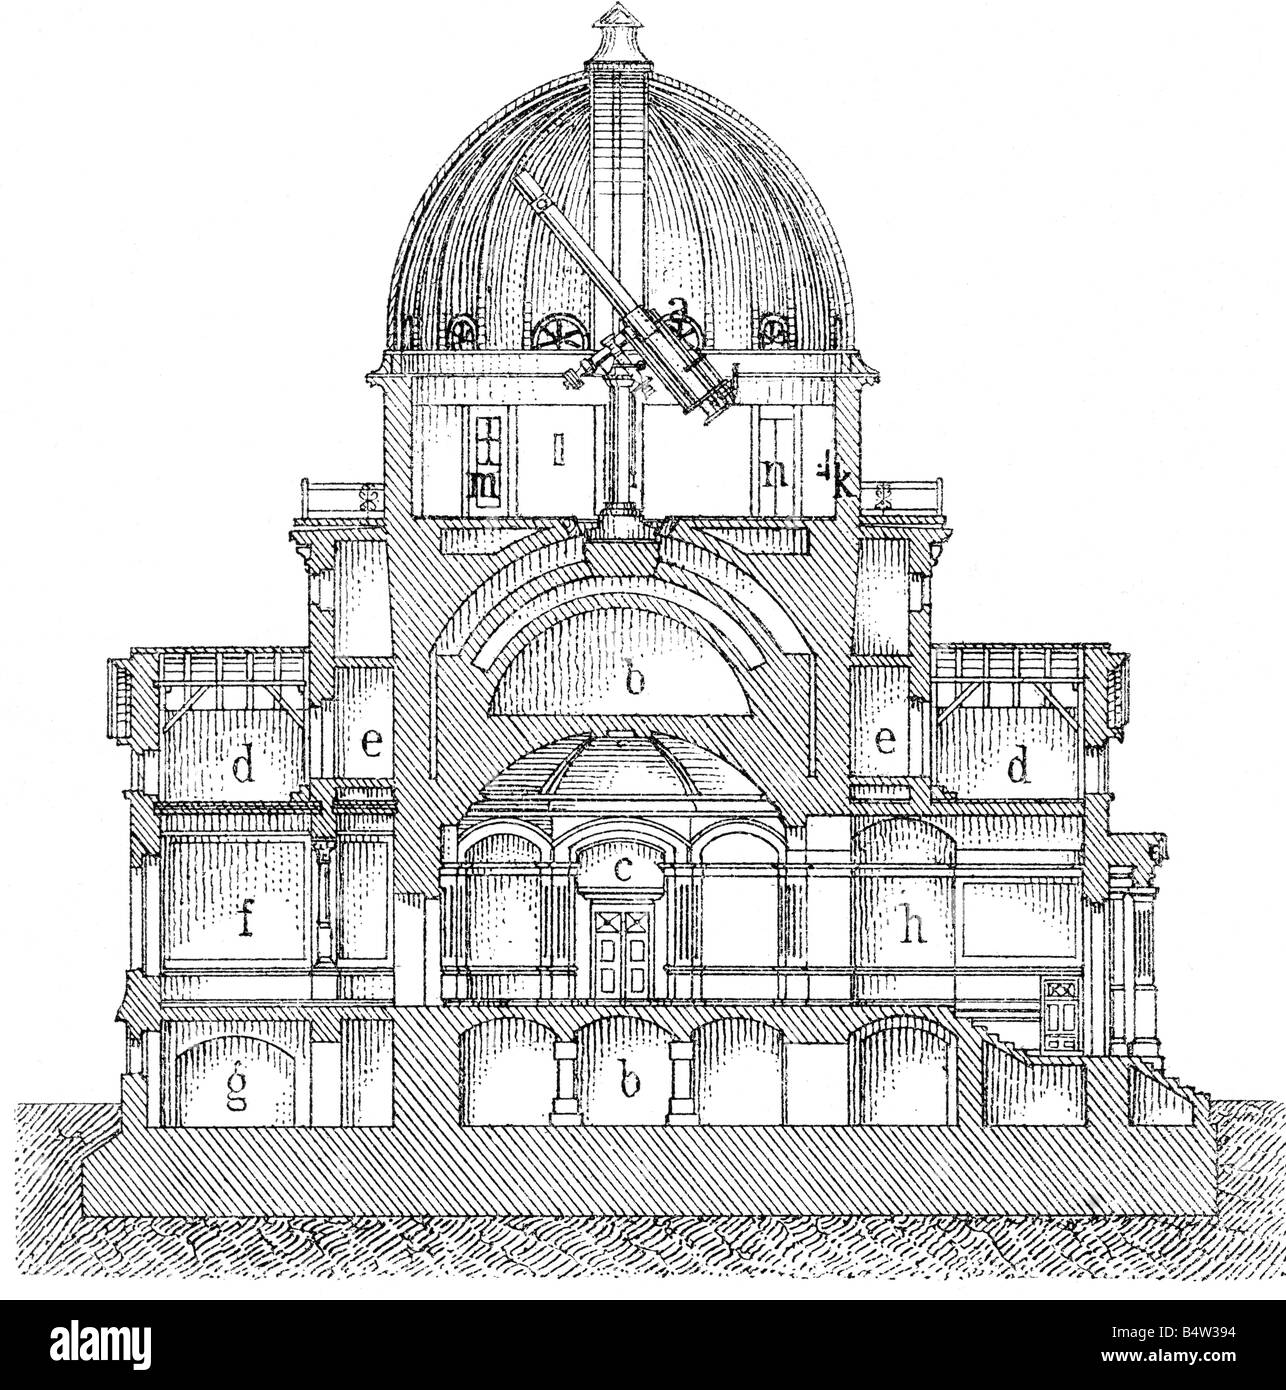 achritecture, buildings, Observatory of Kaiser-Wilhelm-University Strasbourg, built 1875 - 1881, cross section, wood engraving, circa 1890, astronomie, Imperial Germany, Alsace, France, Europe, telescope, Kaiser Wilhelm University, 19th century, science, historic, historical, Stock Photo